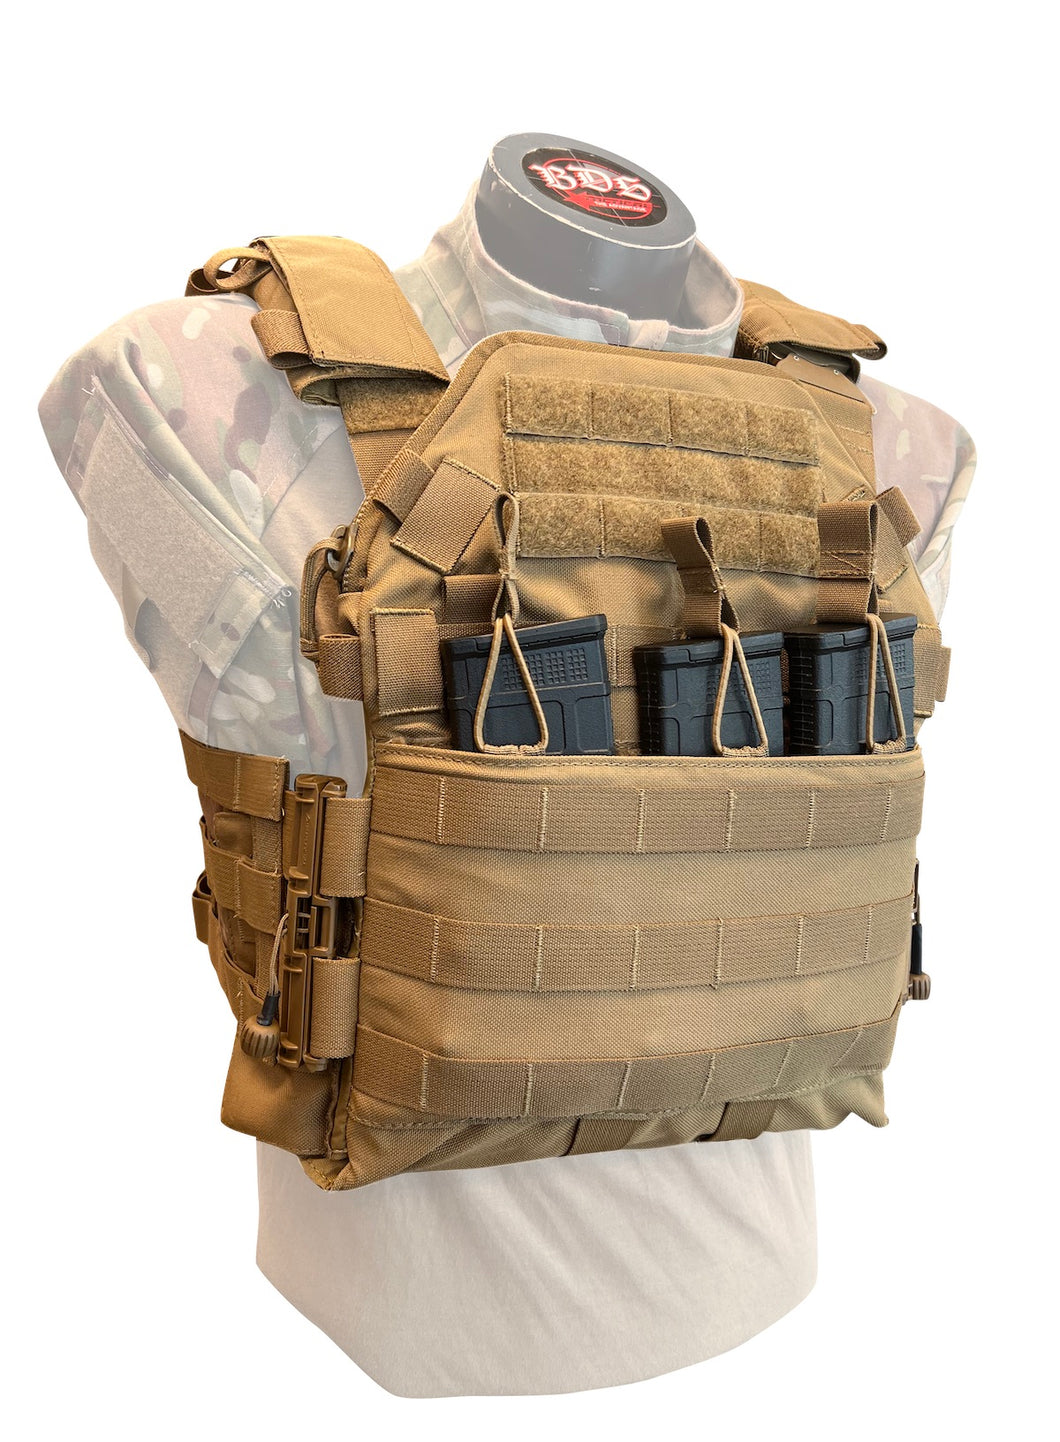 Tactical Gear manufactured in the USA, by BDS Tactical Gear.